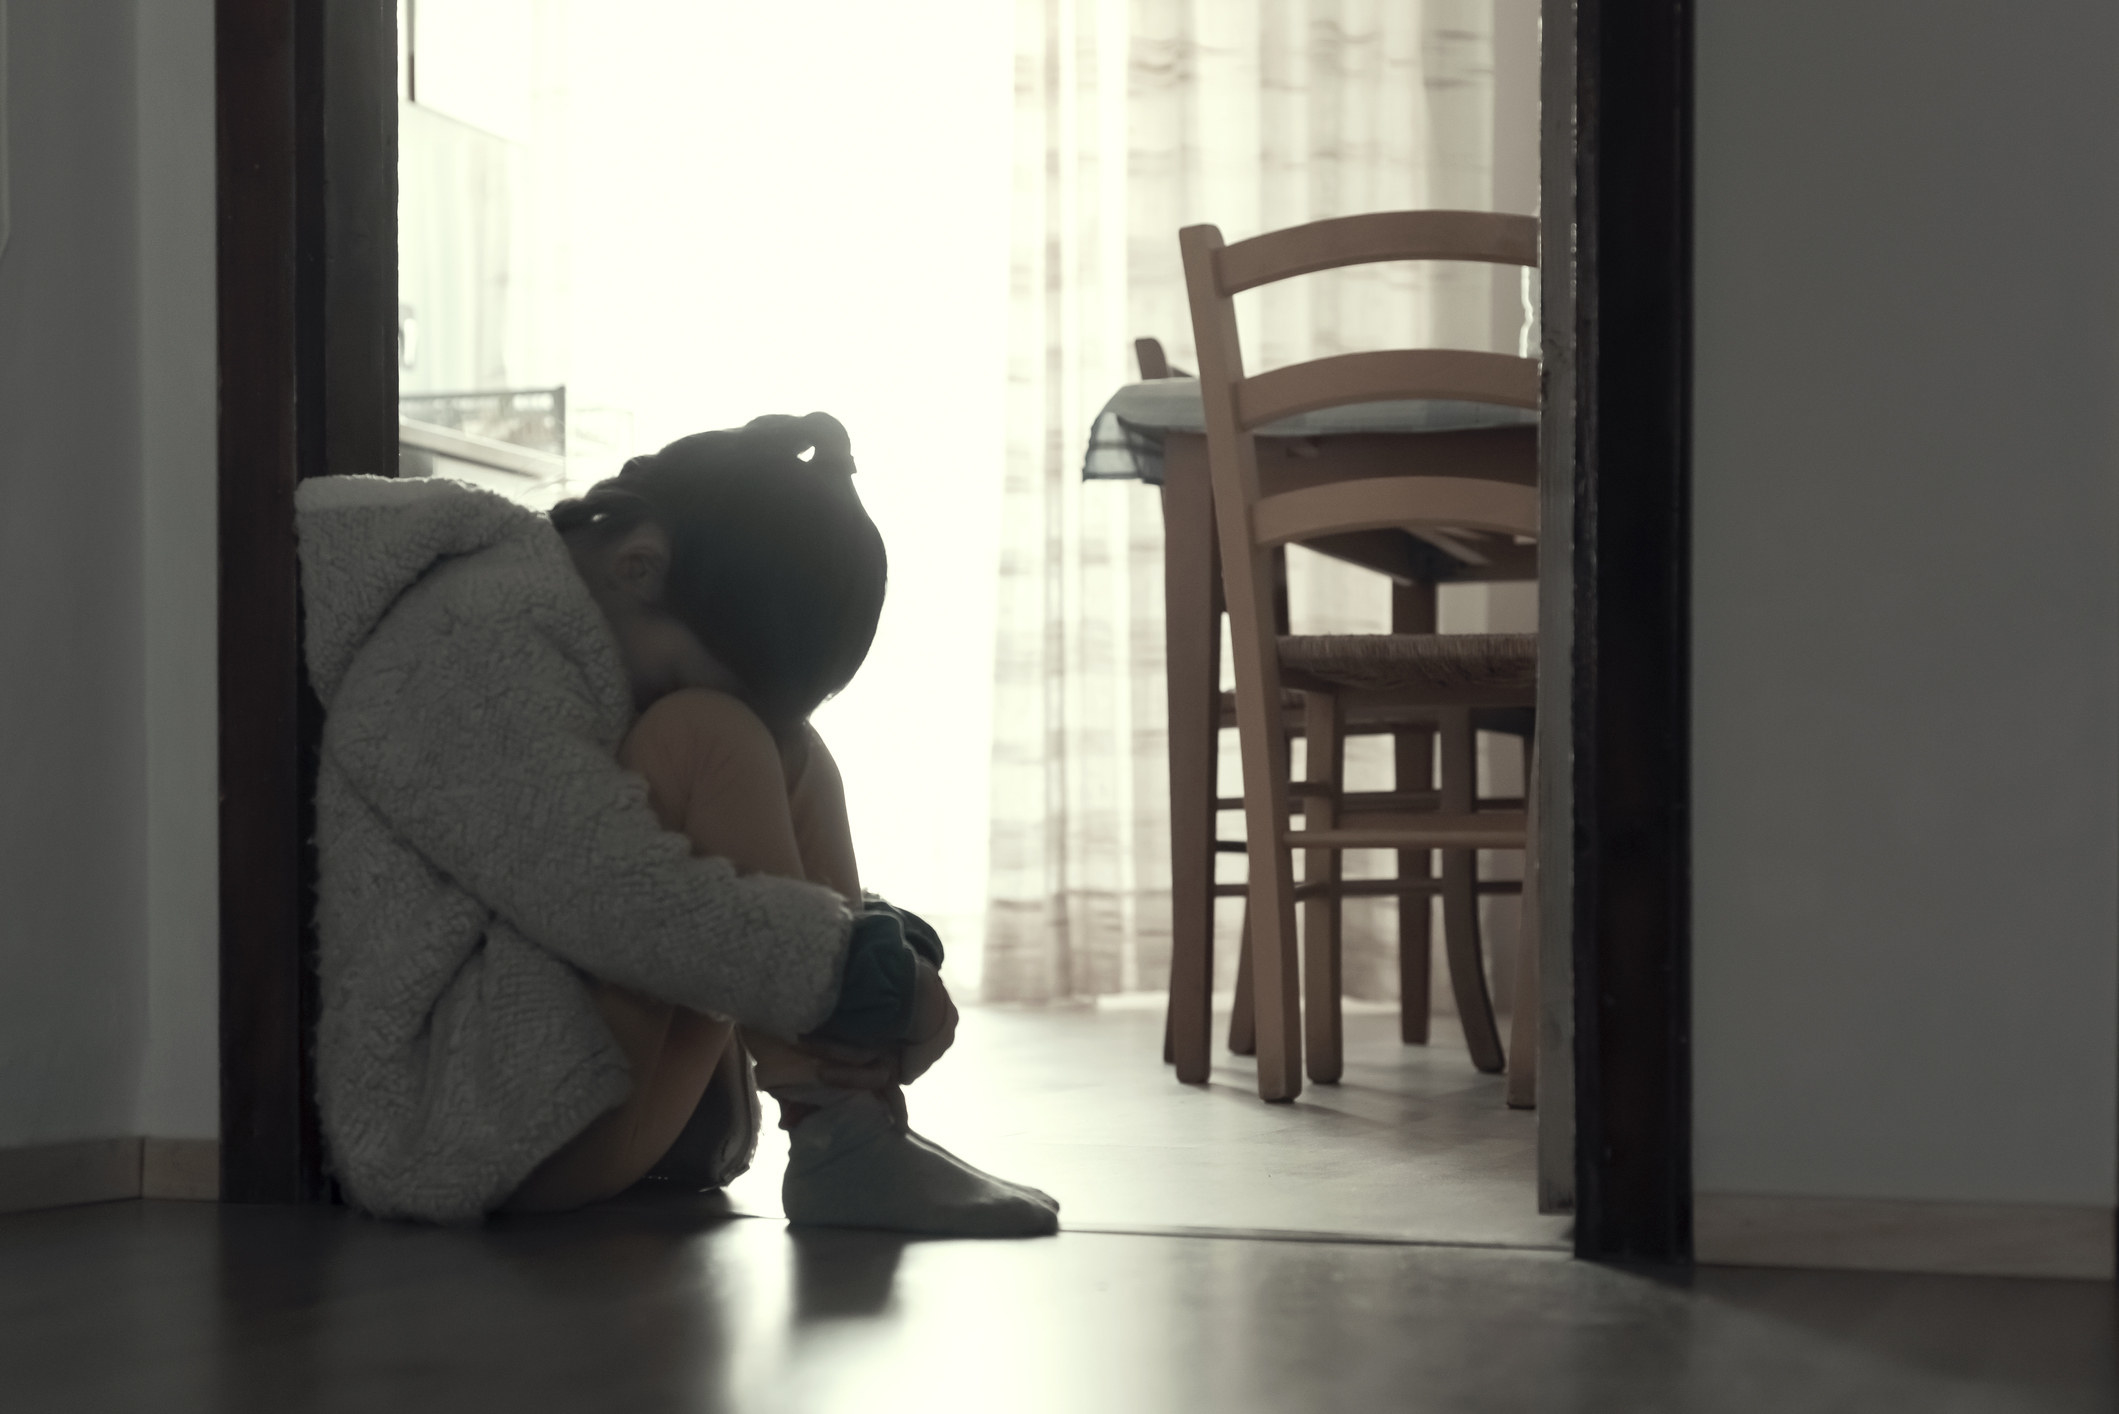 A young girl sits alone with her head down